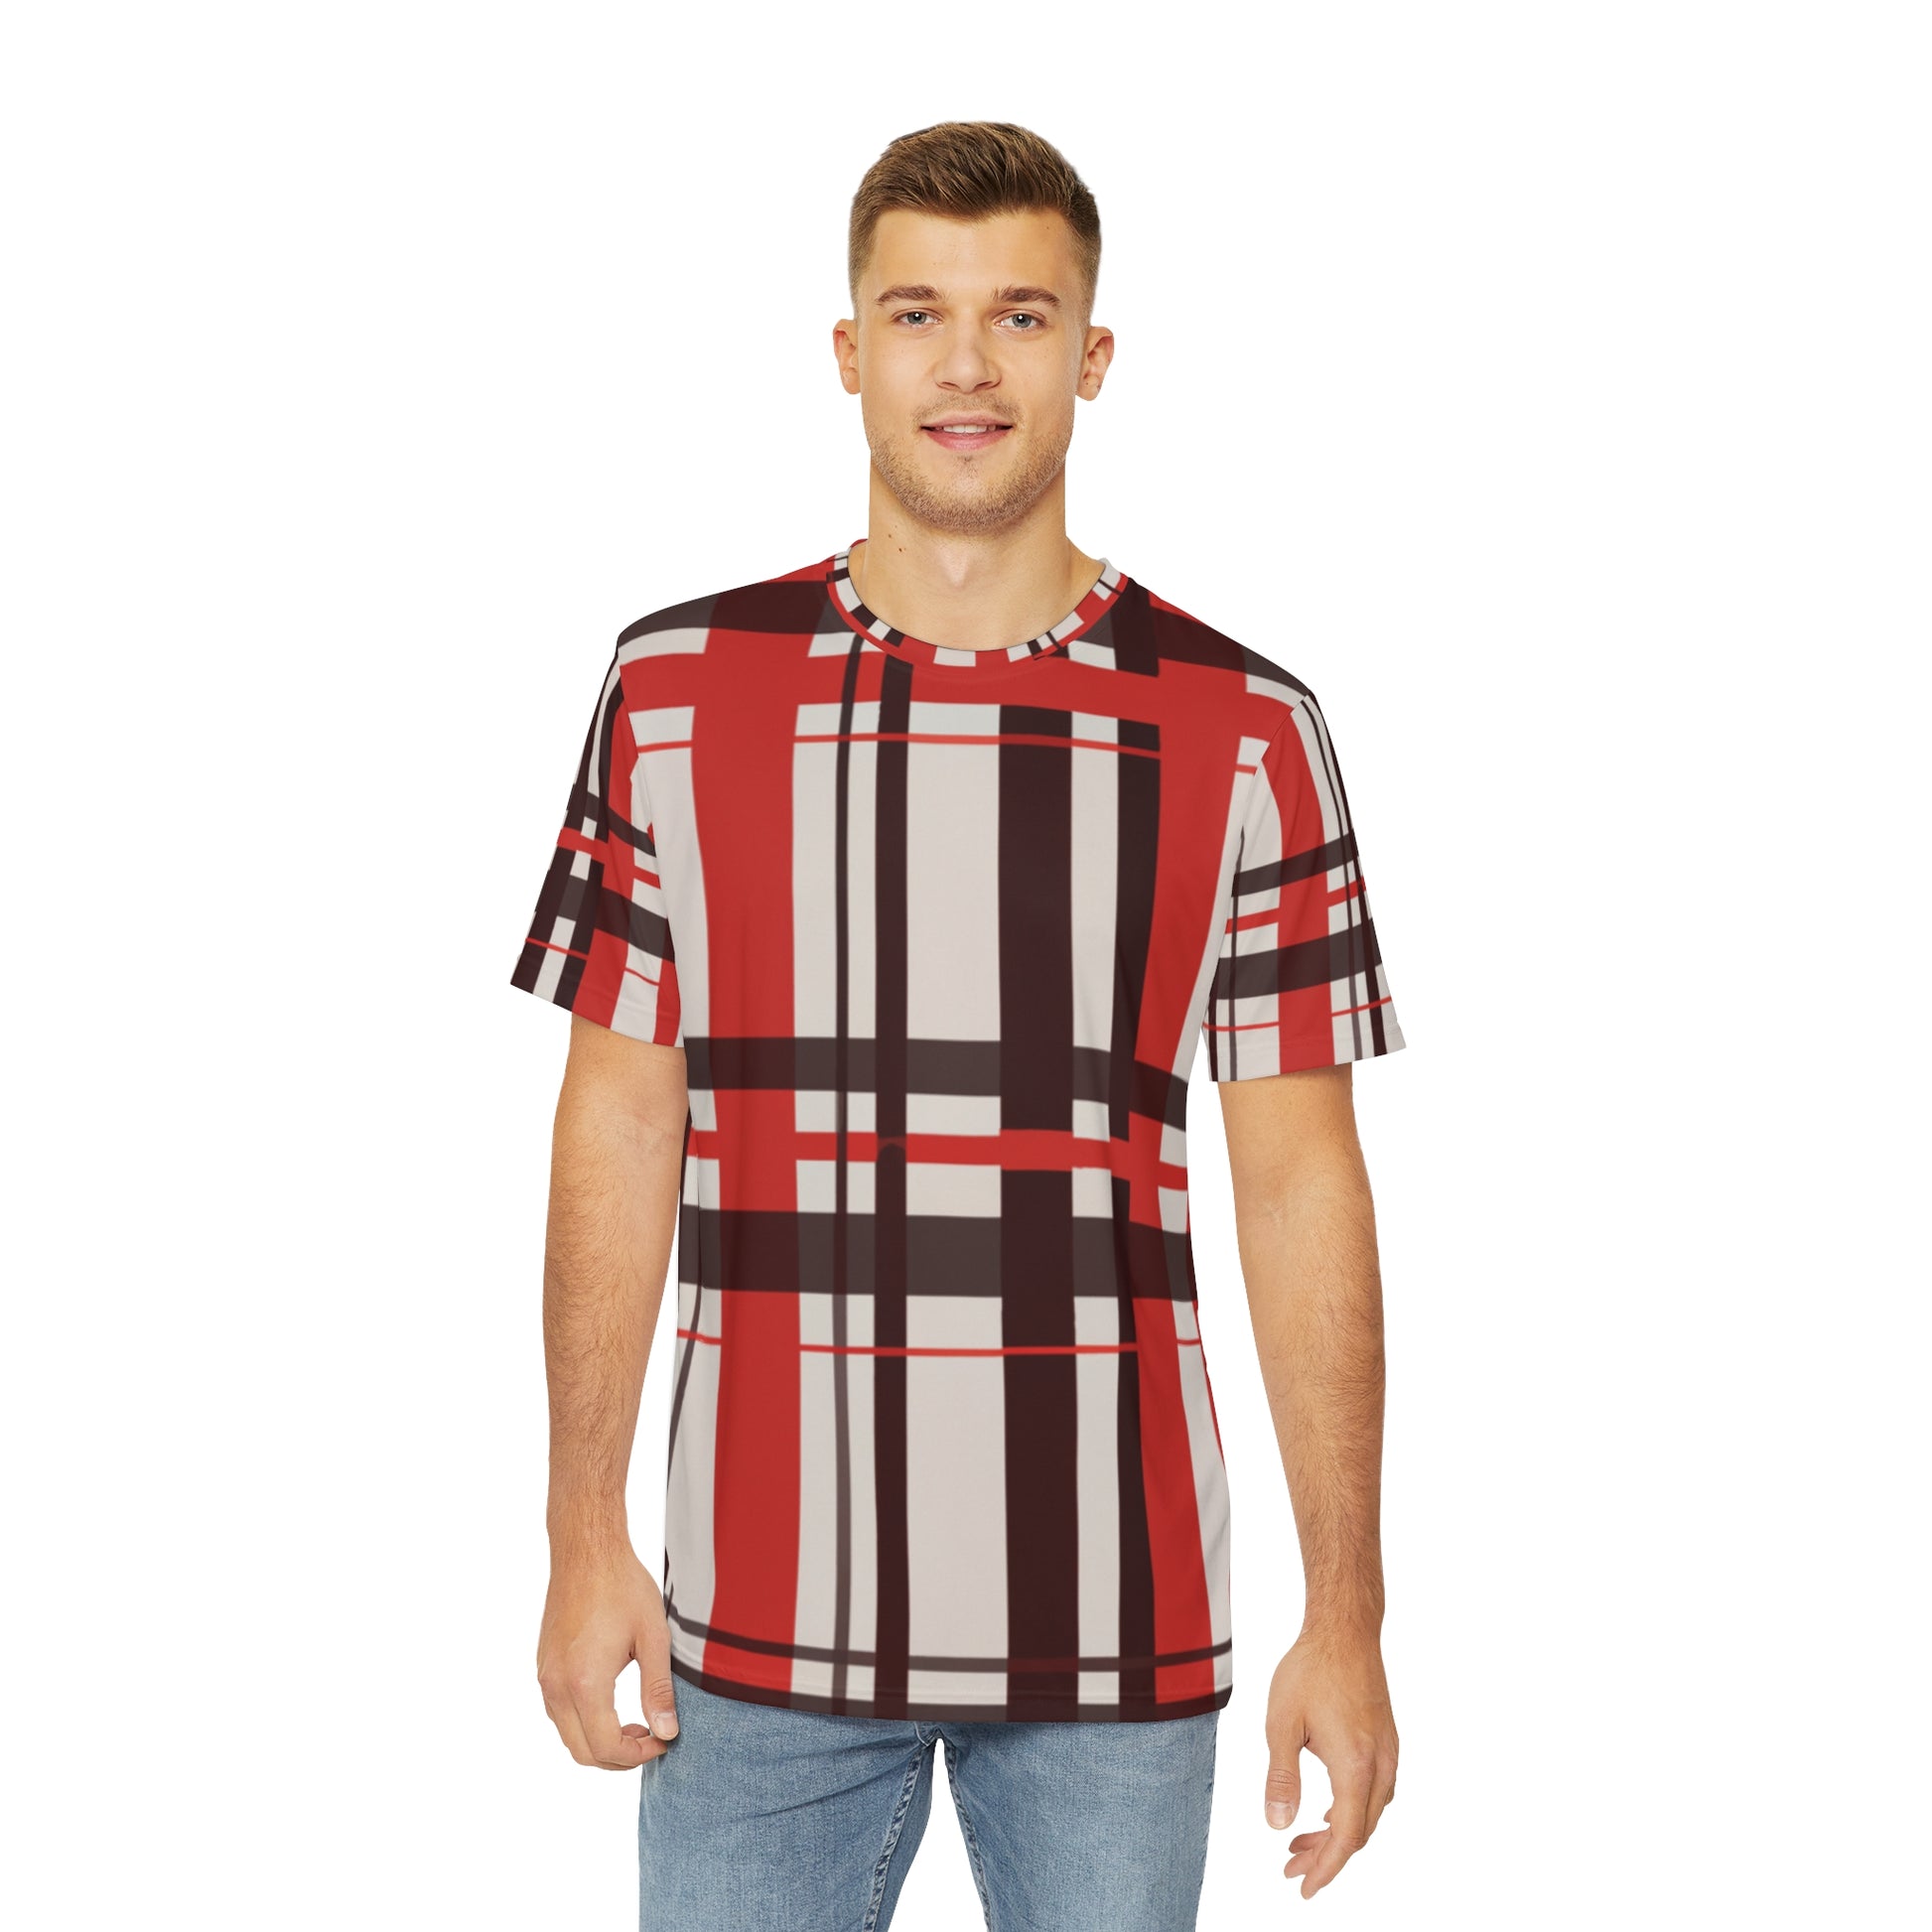 Front view of the Highland Ember Dawn Tartan Crewneck Pullover All-Over Print Short-Sleeved Shirt black red white plaid pattern paired with casual denim pants worn by a white man